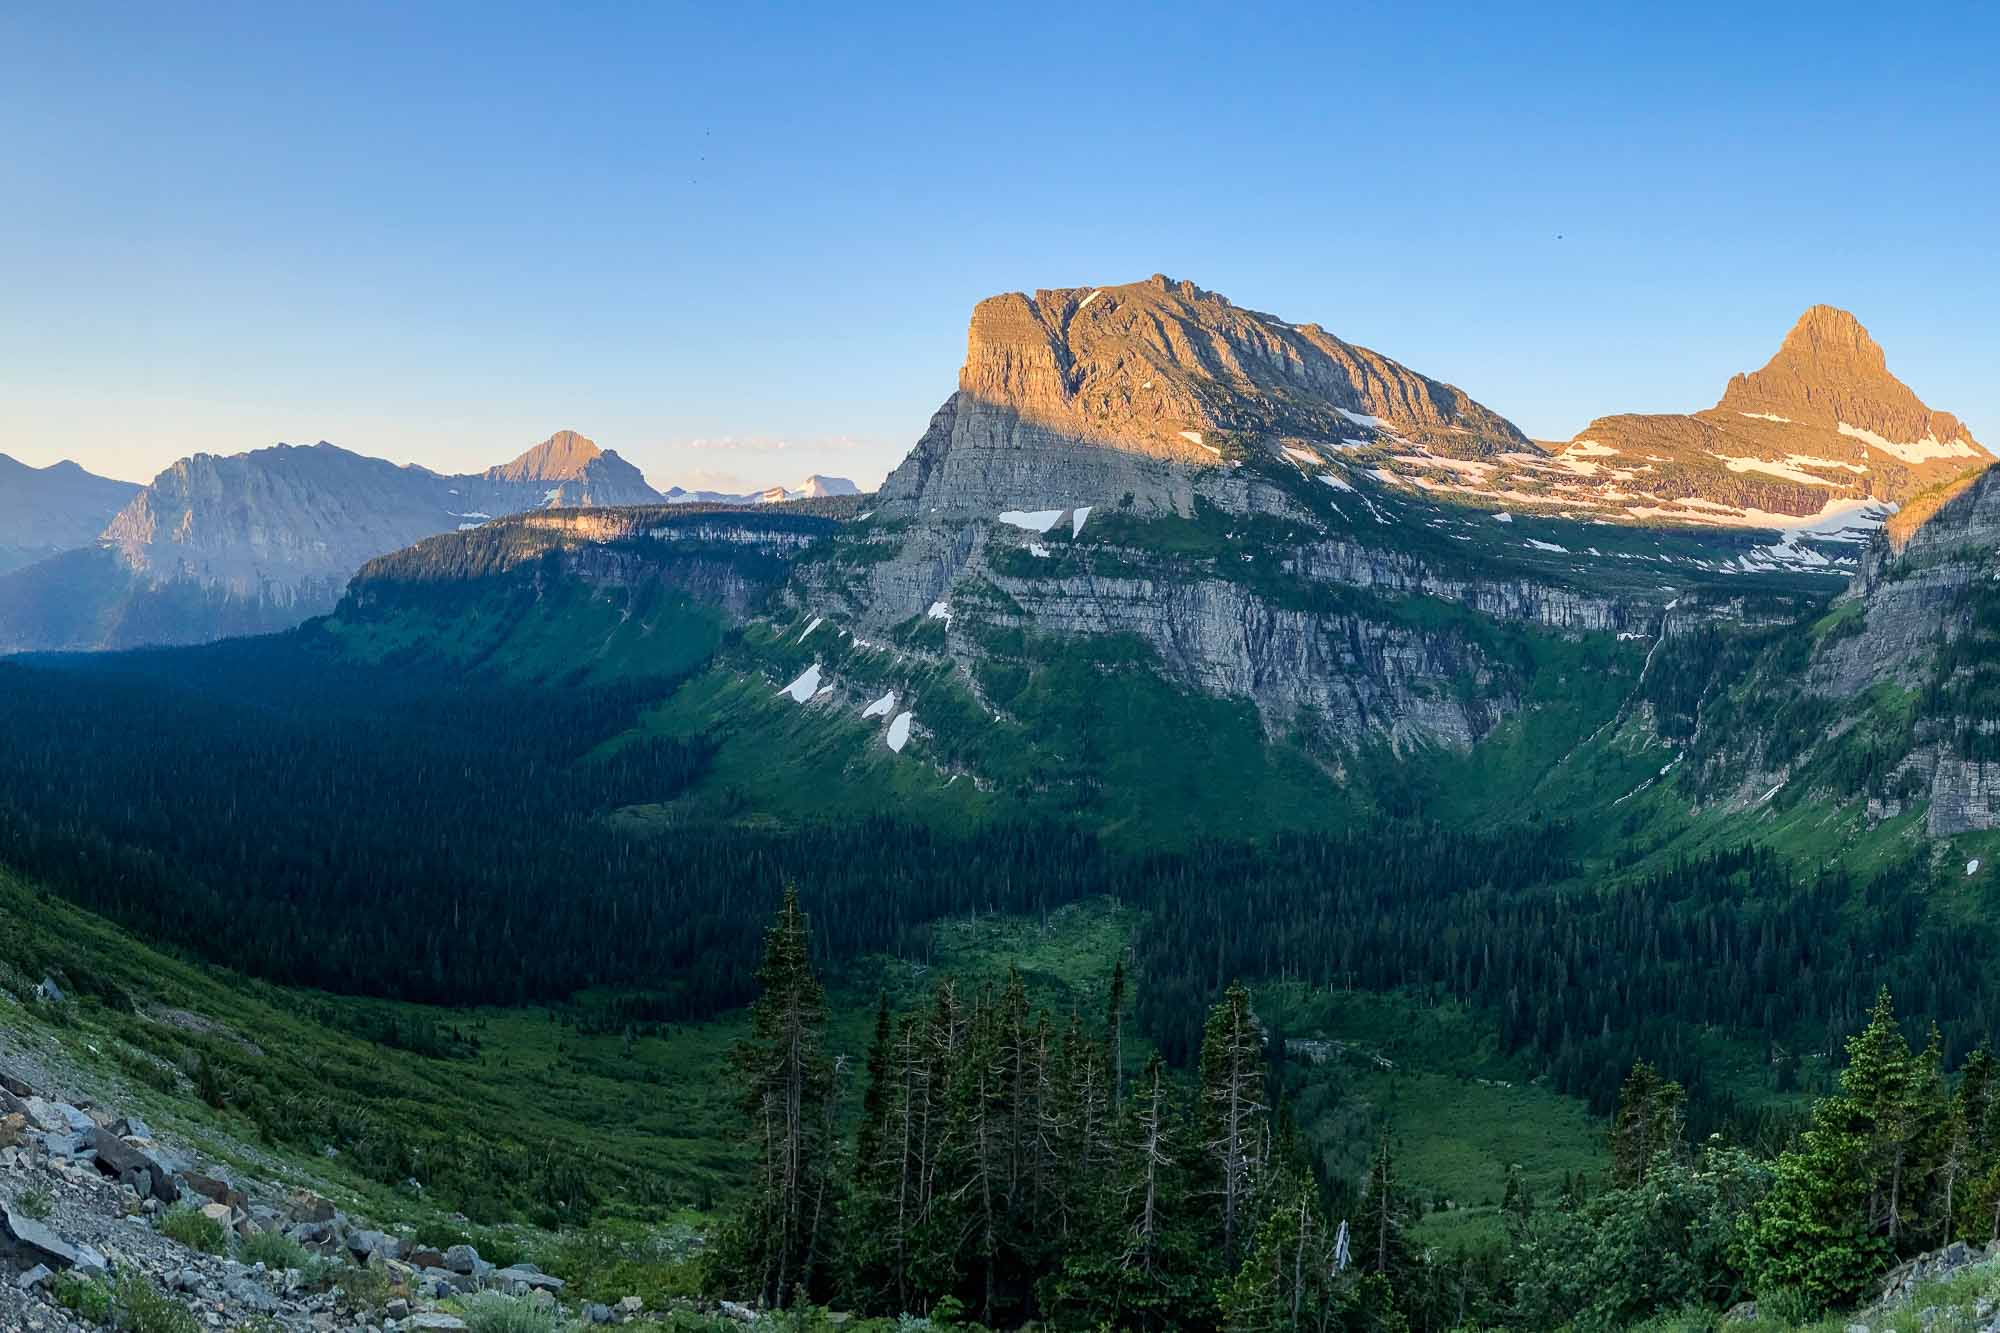 Going-to-the-Sun Road viewpoint in Glacier National Park, Montana